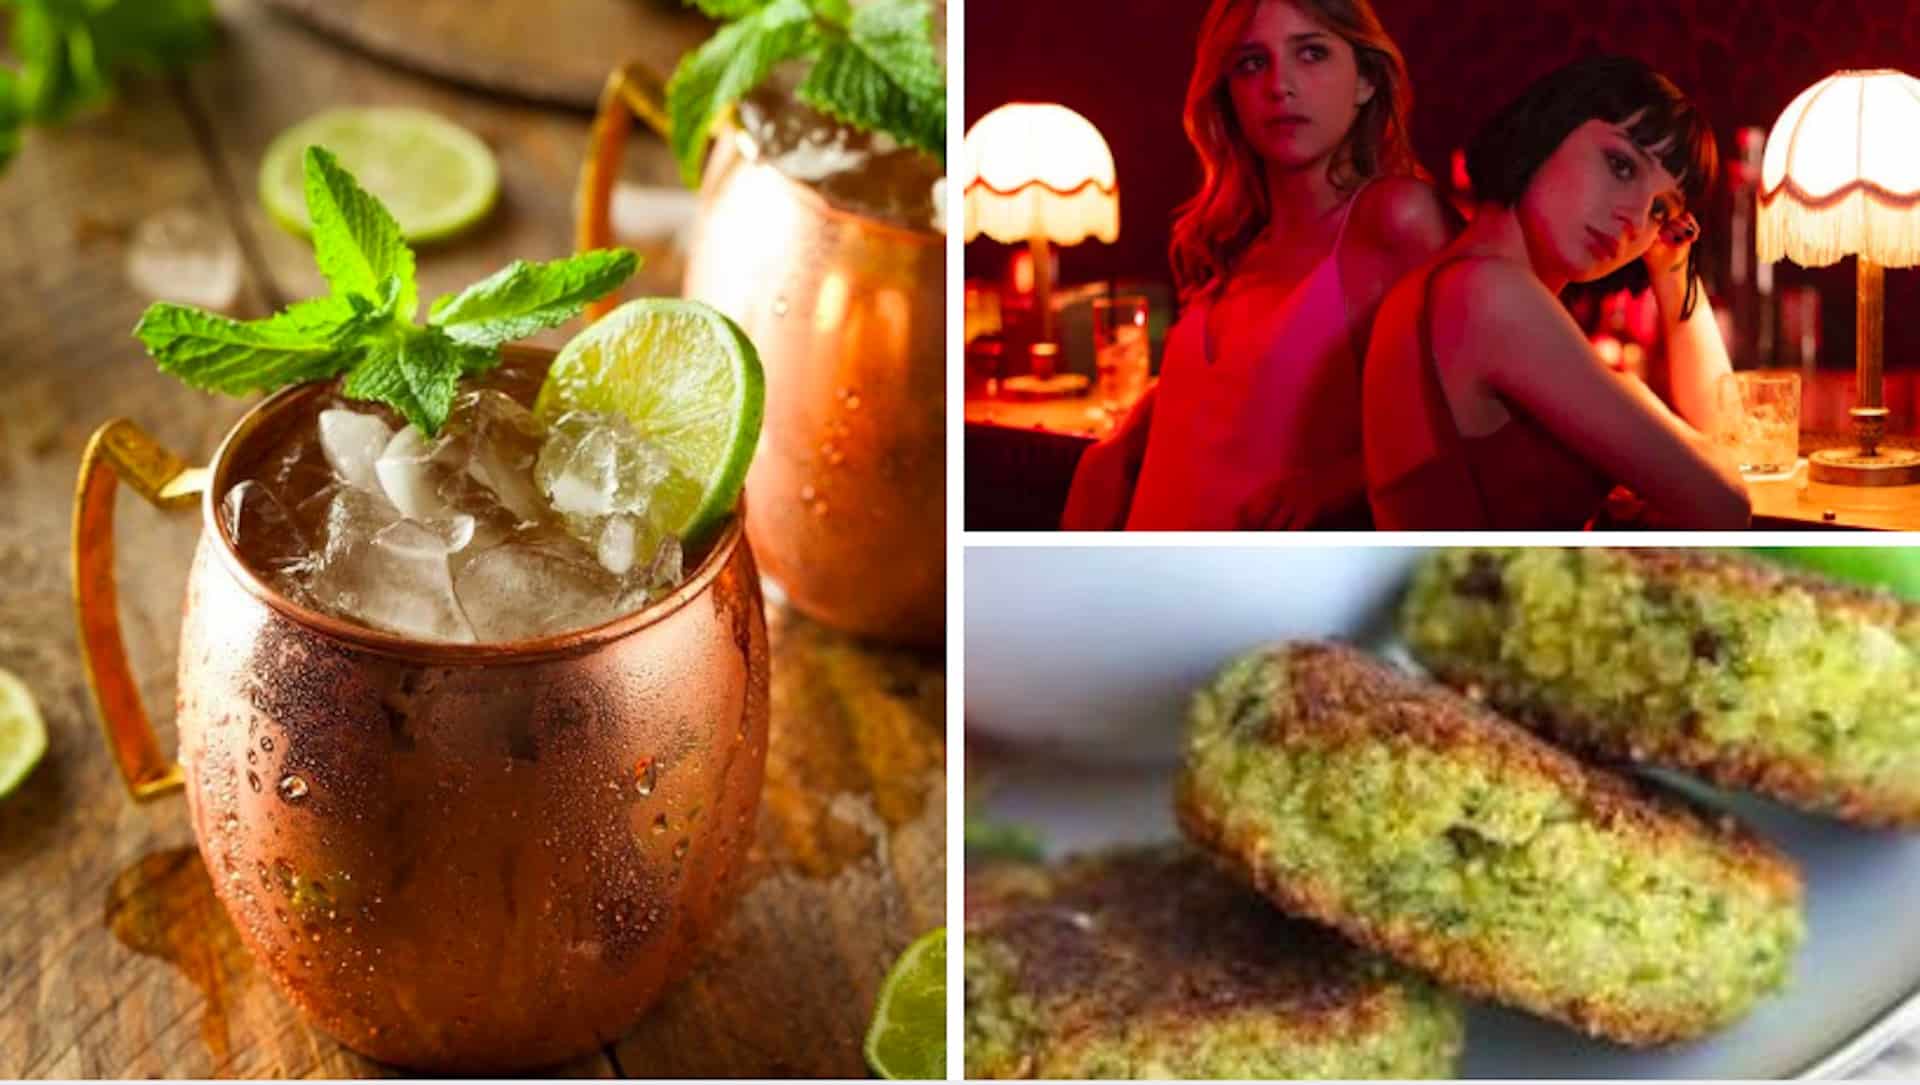 Baby in chiave food and drink: Moscow Mule e Falafel